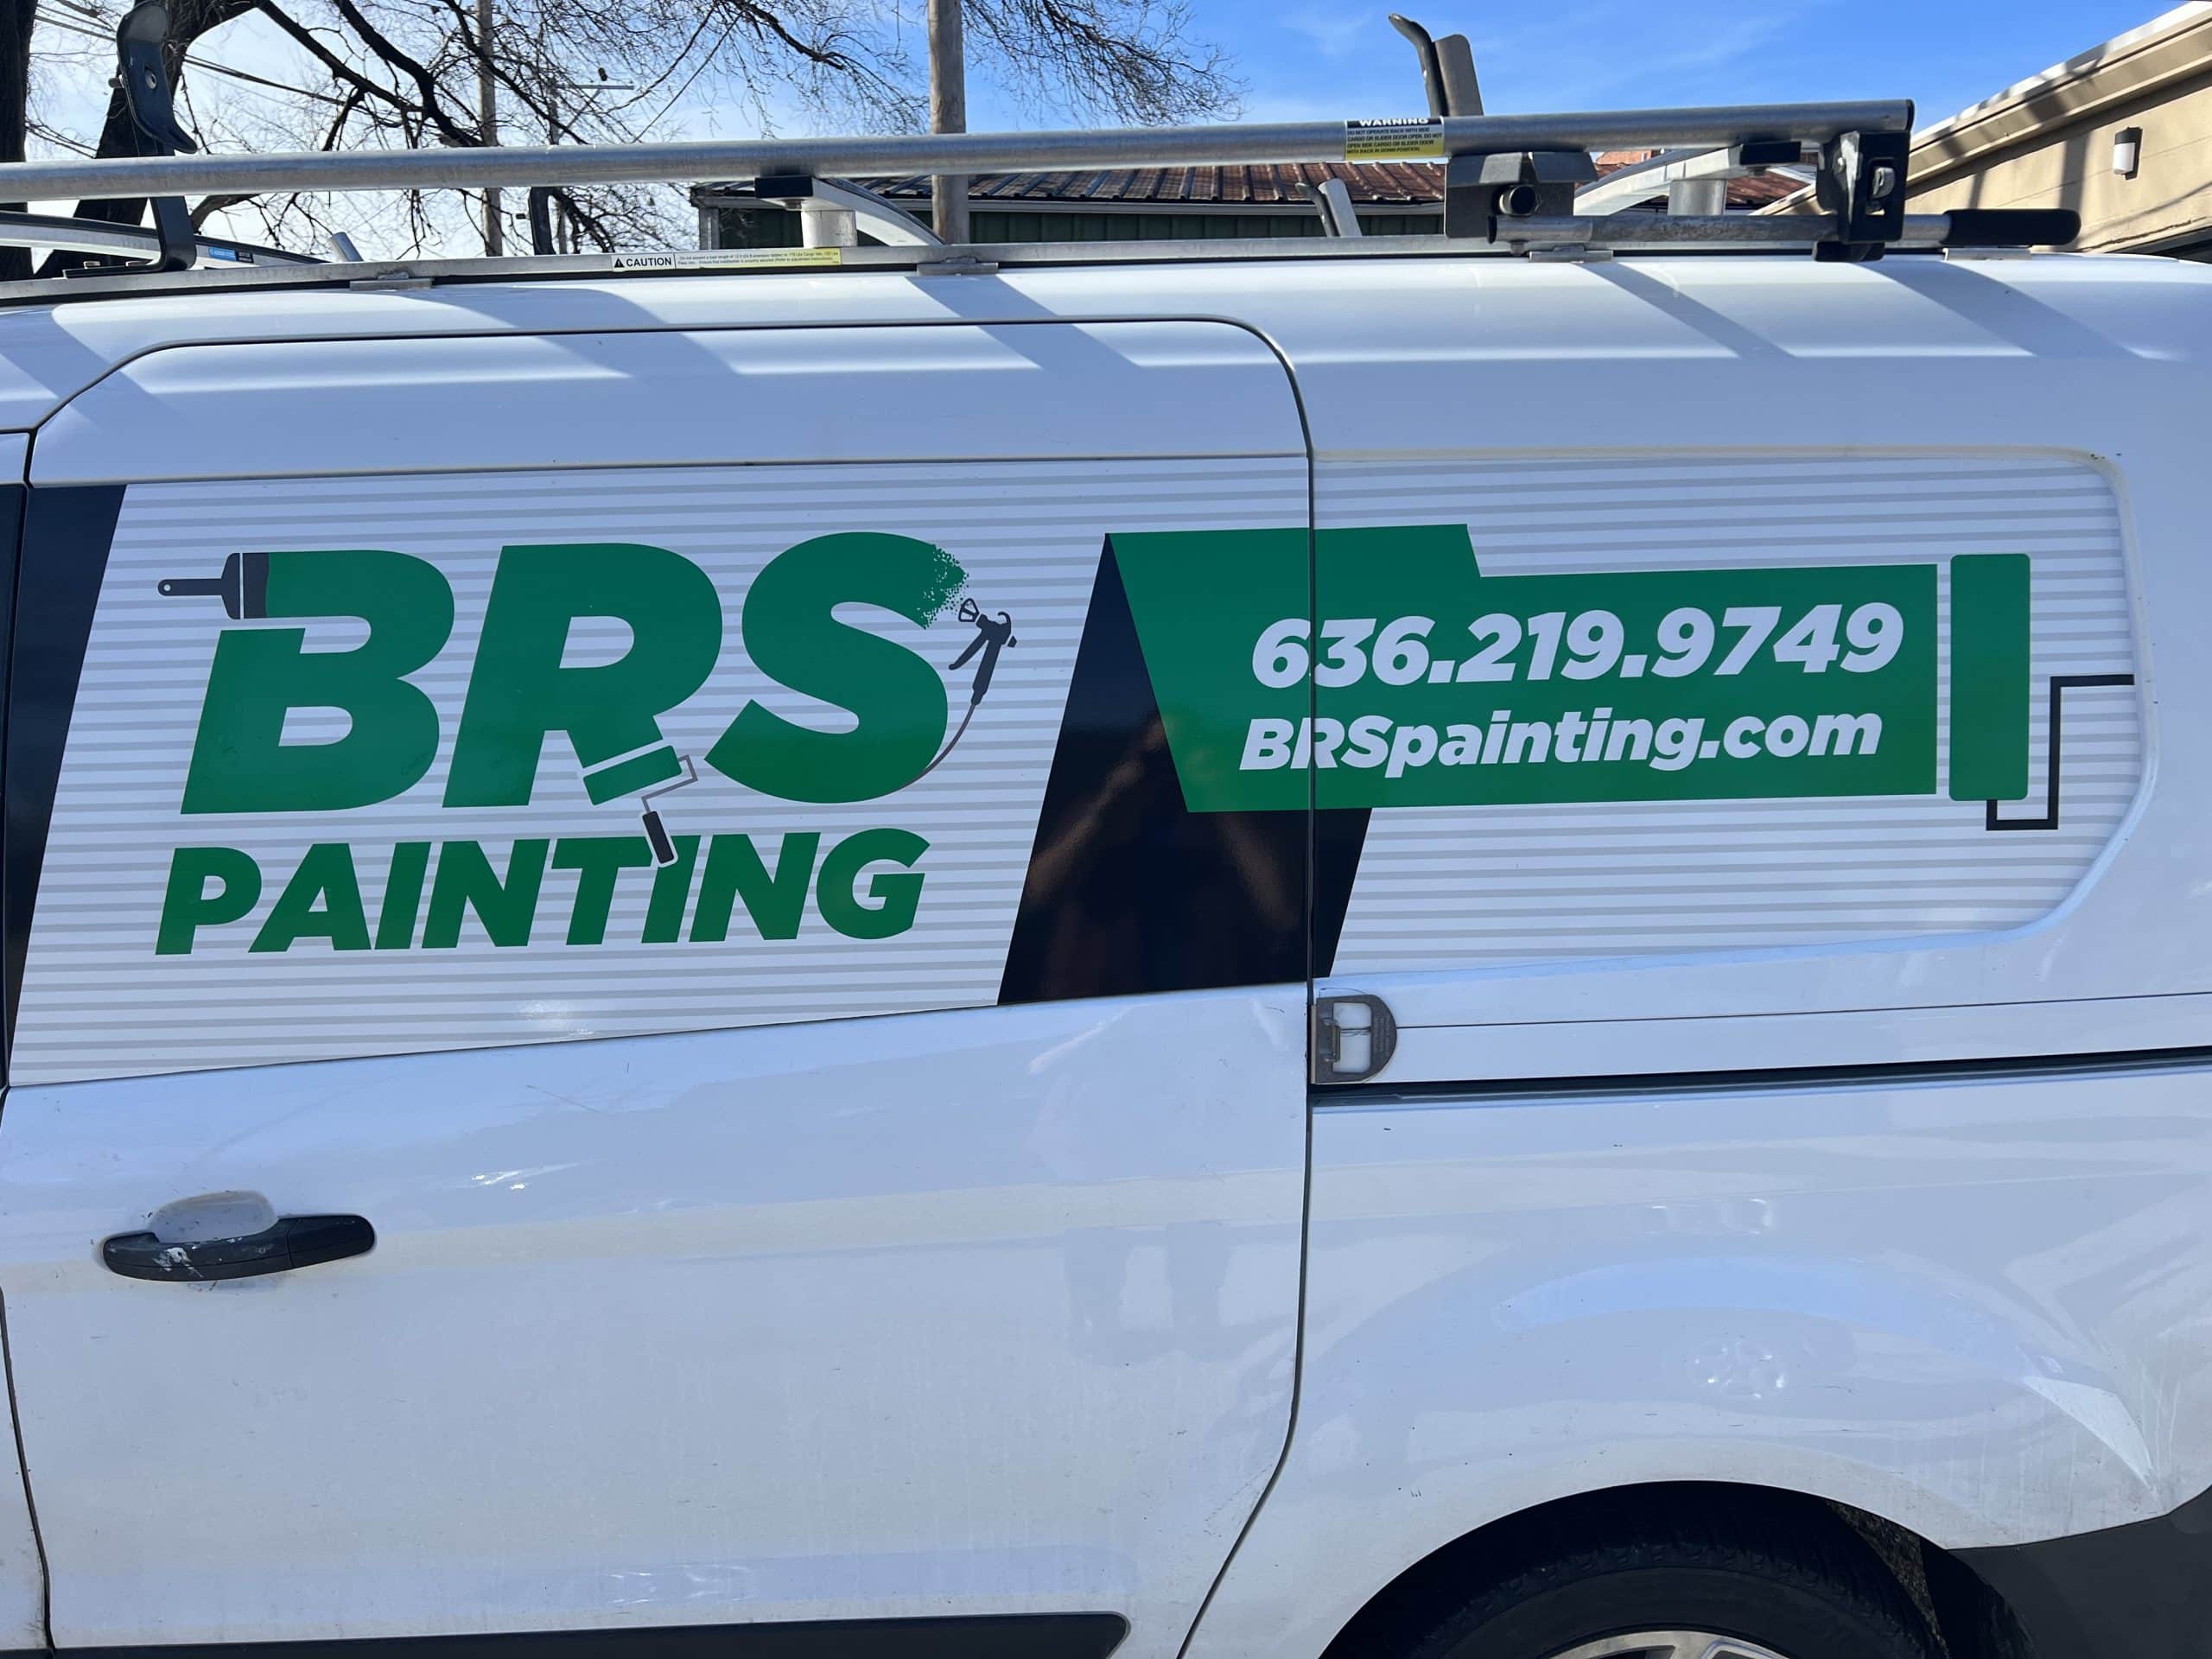 The work van for BRS Painting.